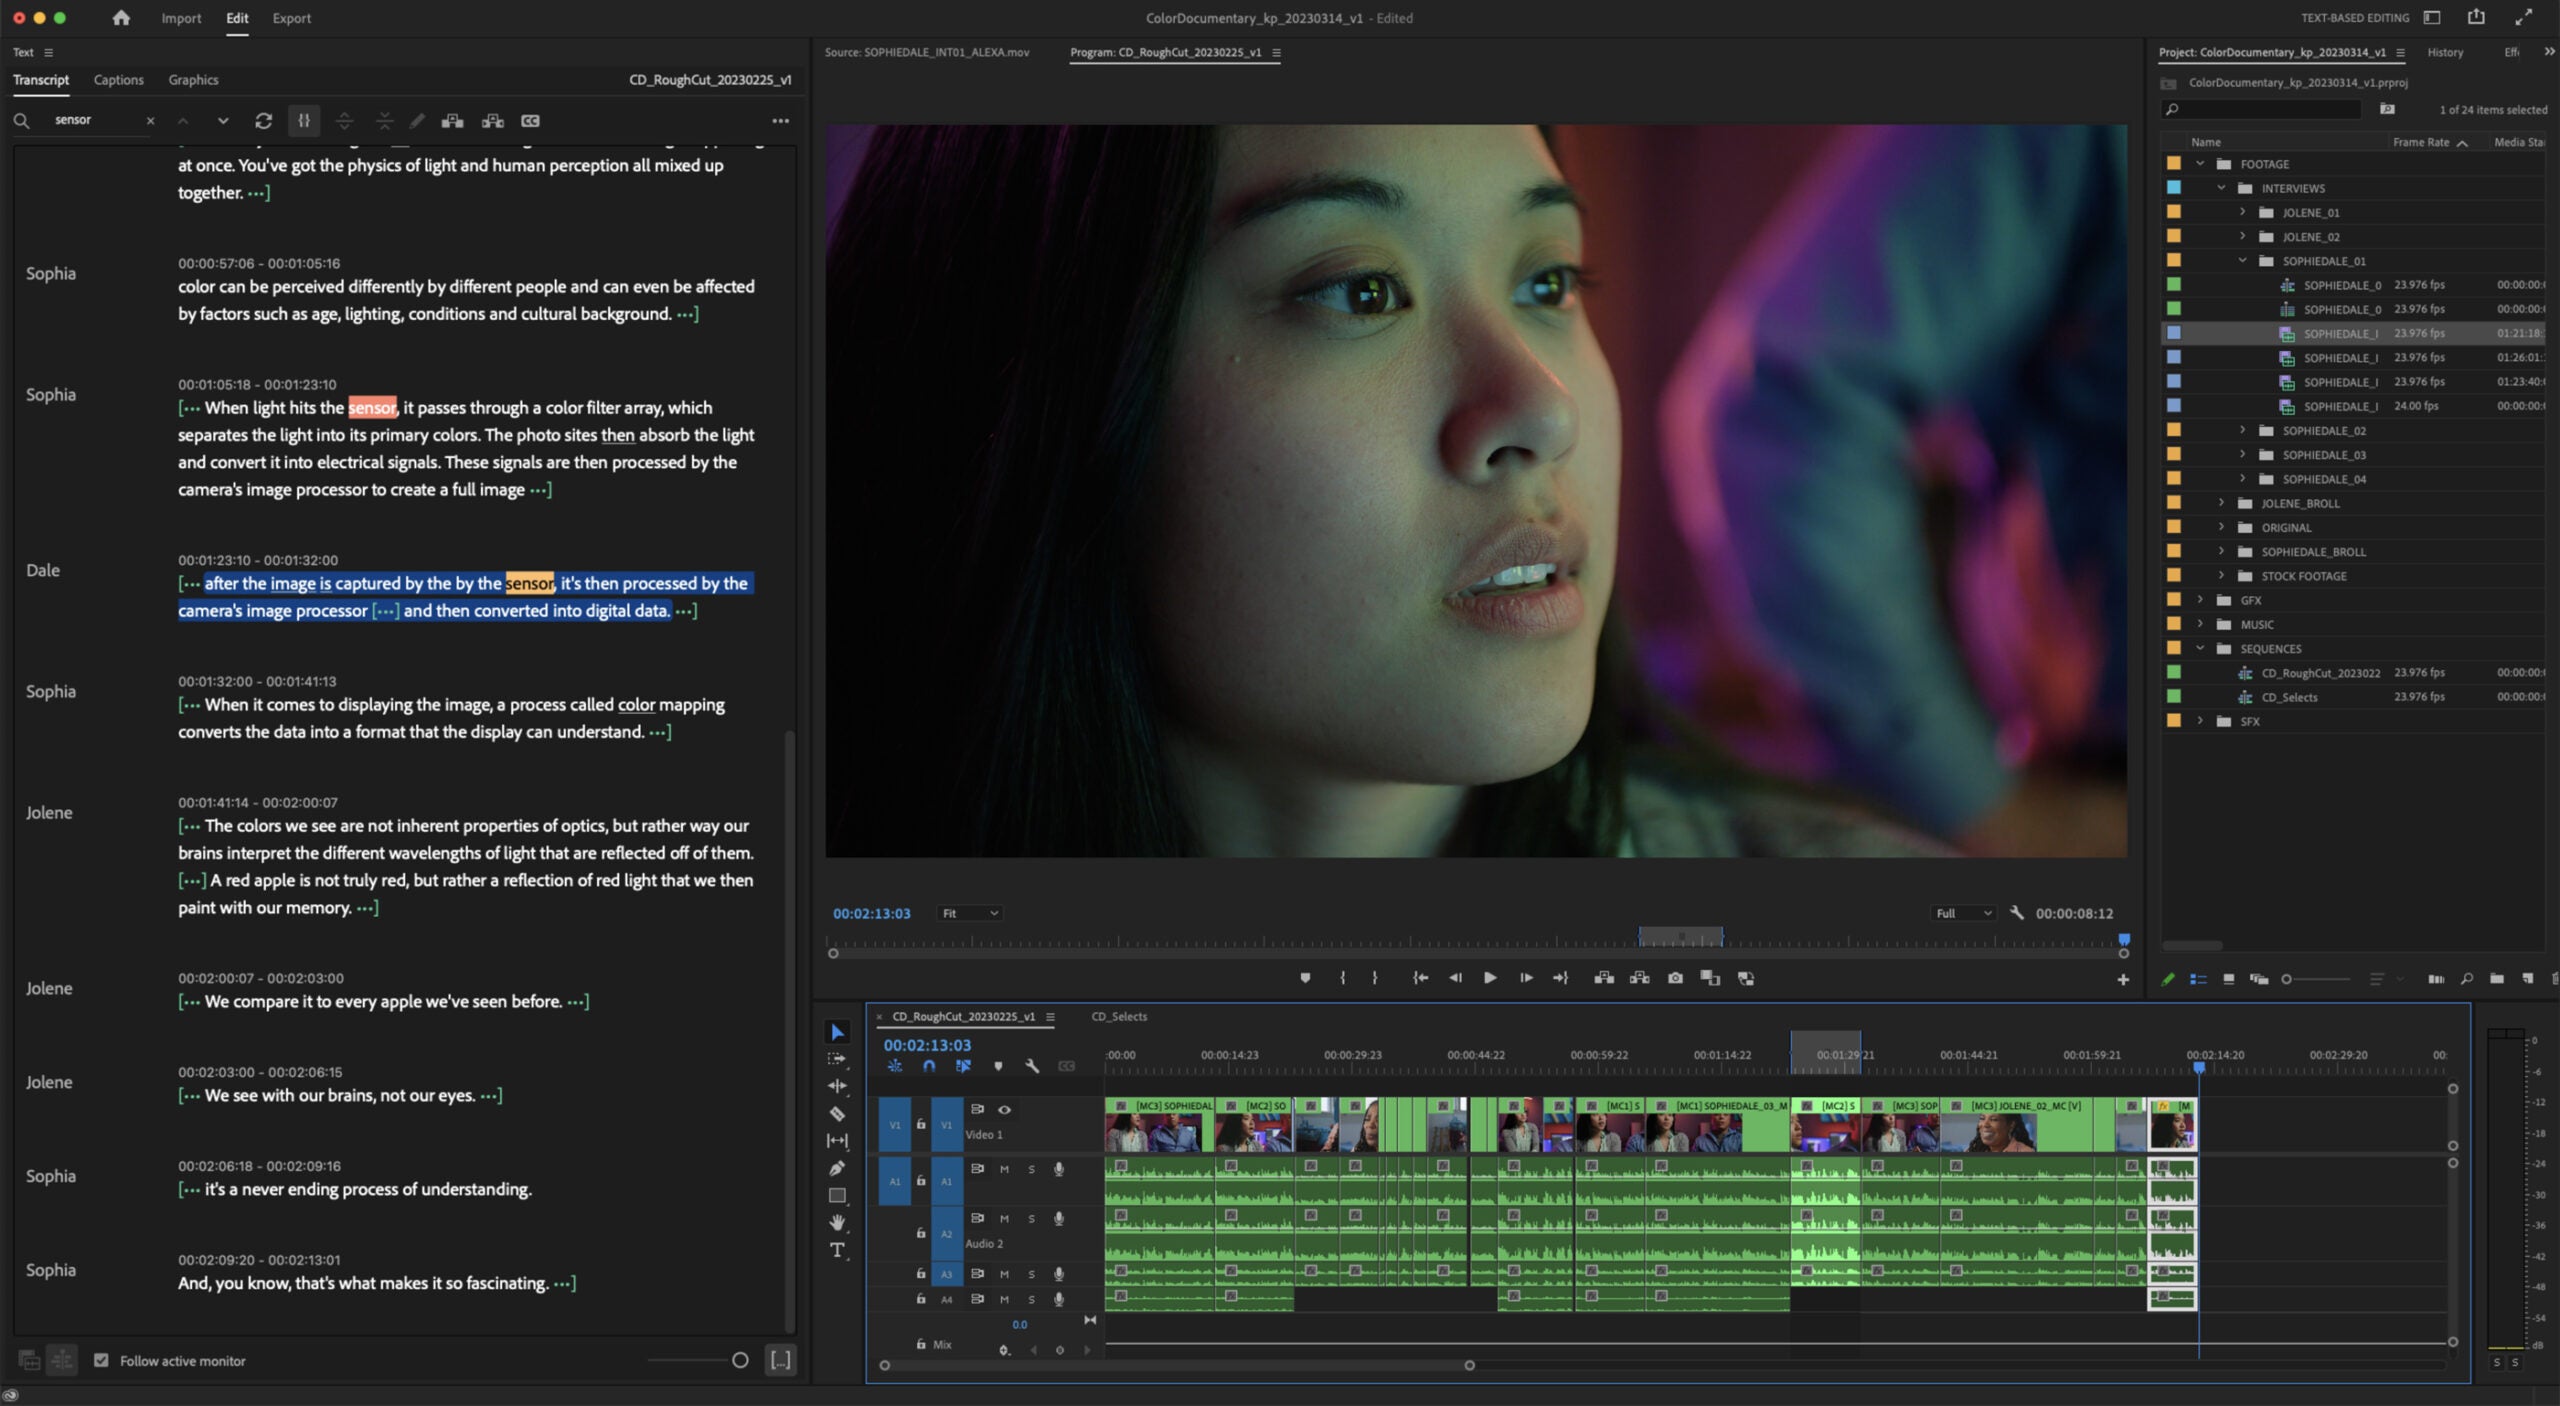 Adobe Premiere Pro screenshot showing text-based editing